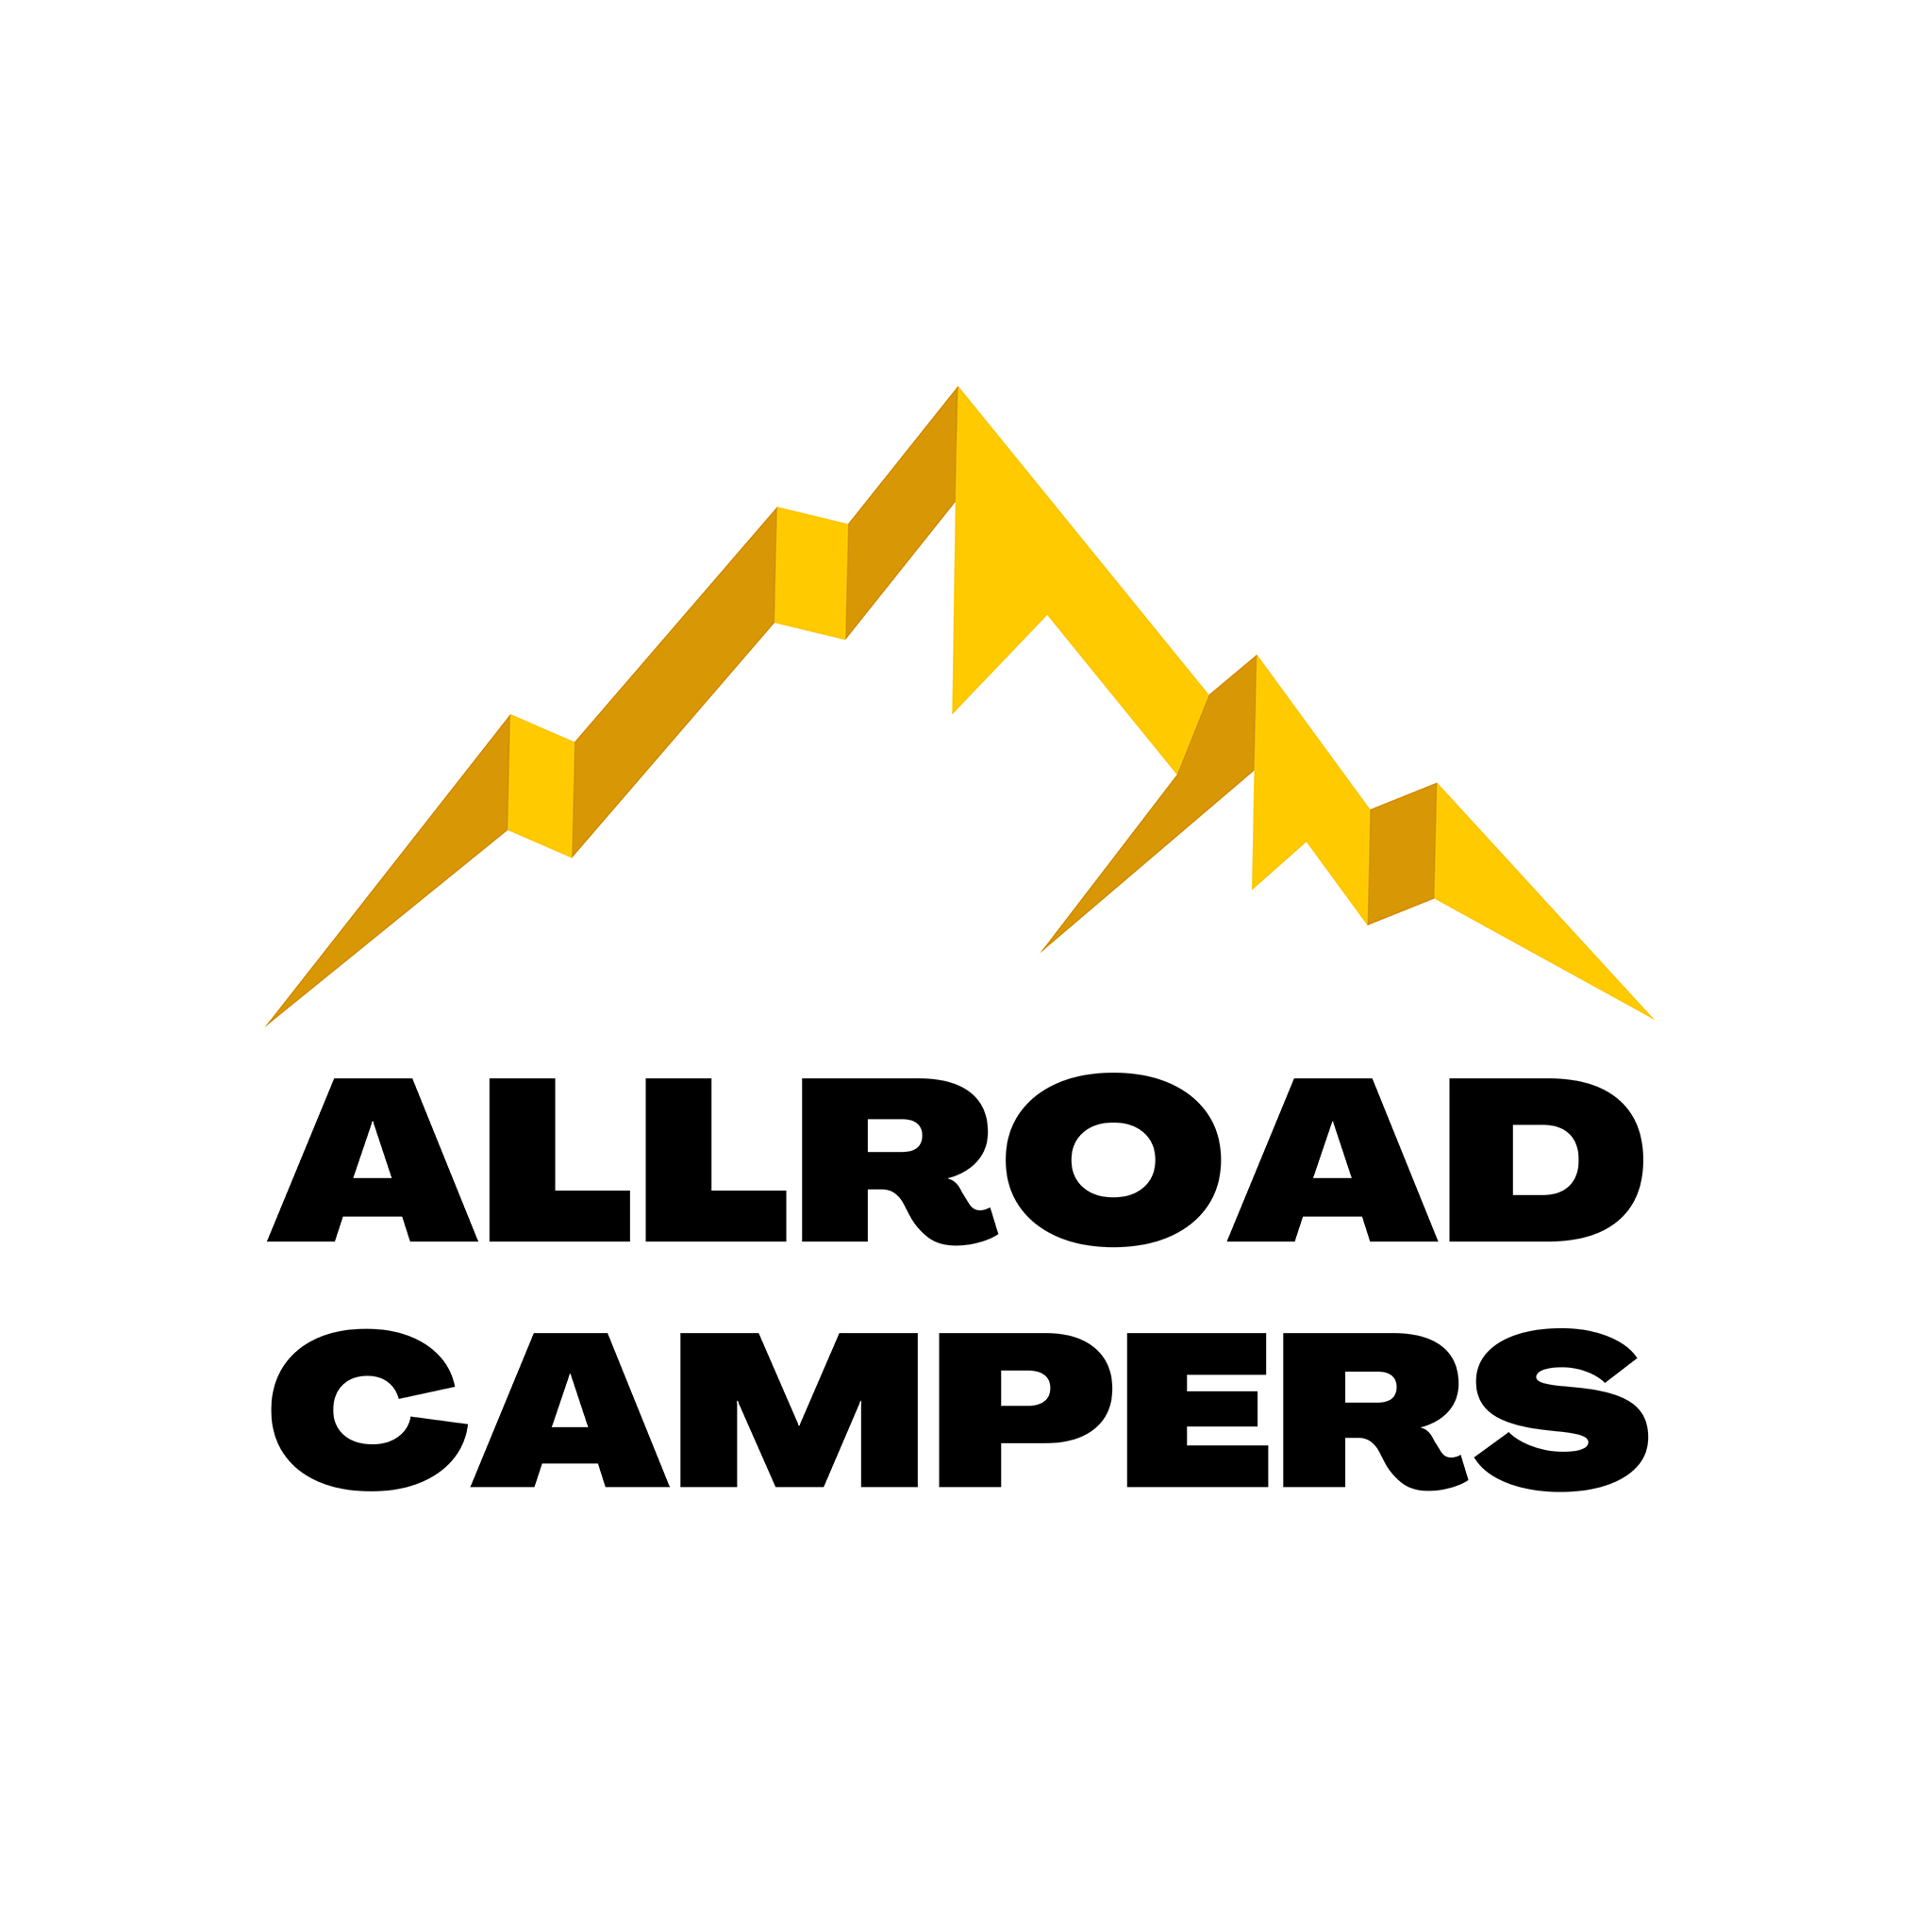 Allroad Campers